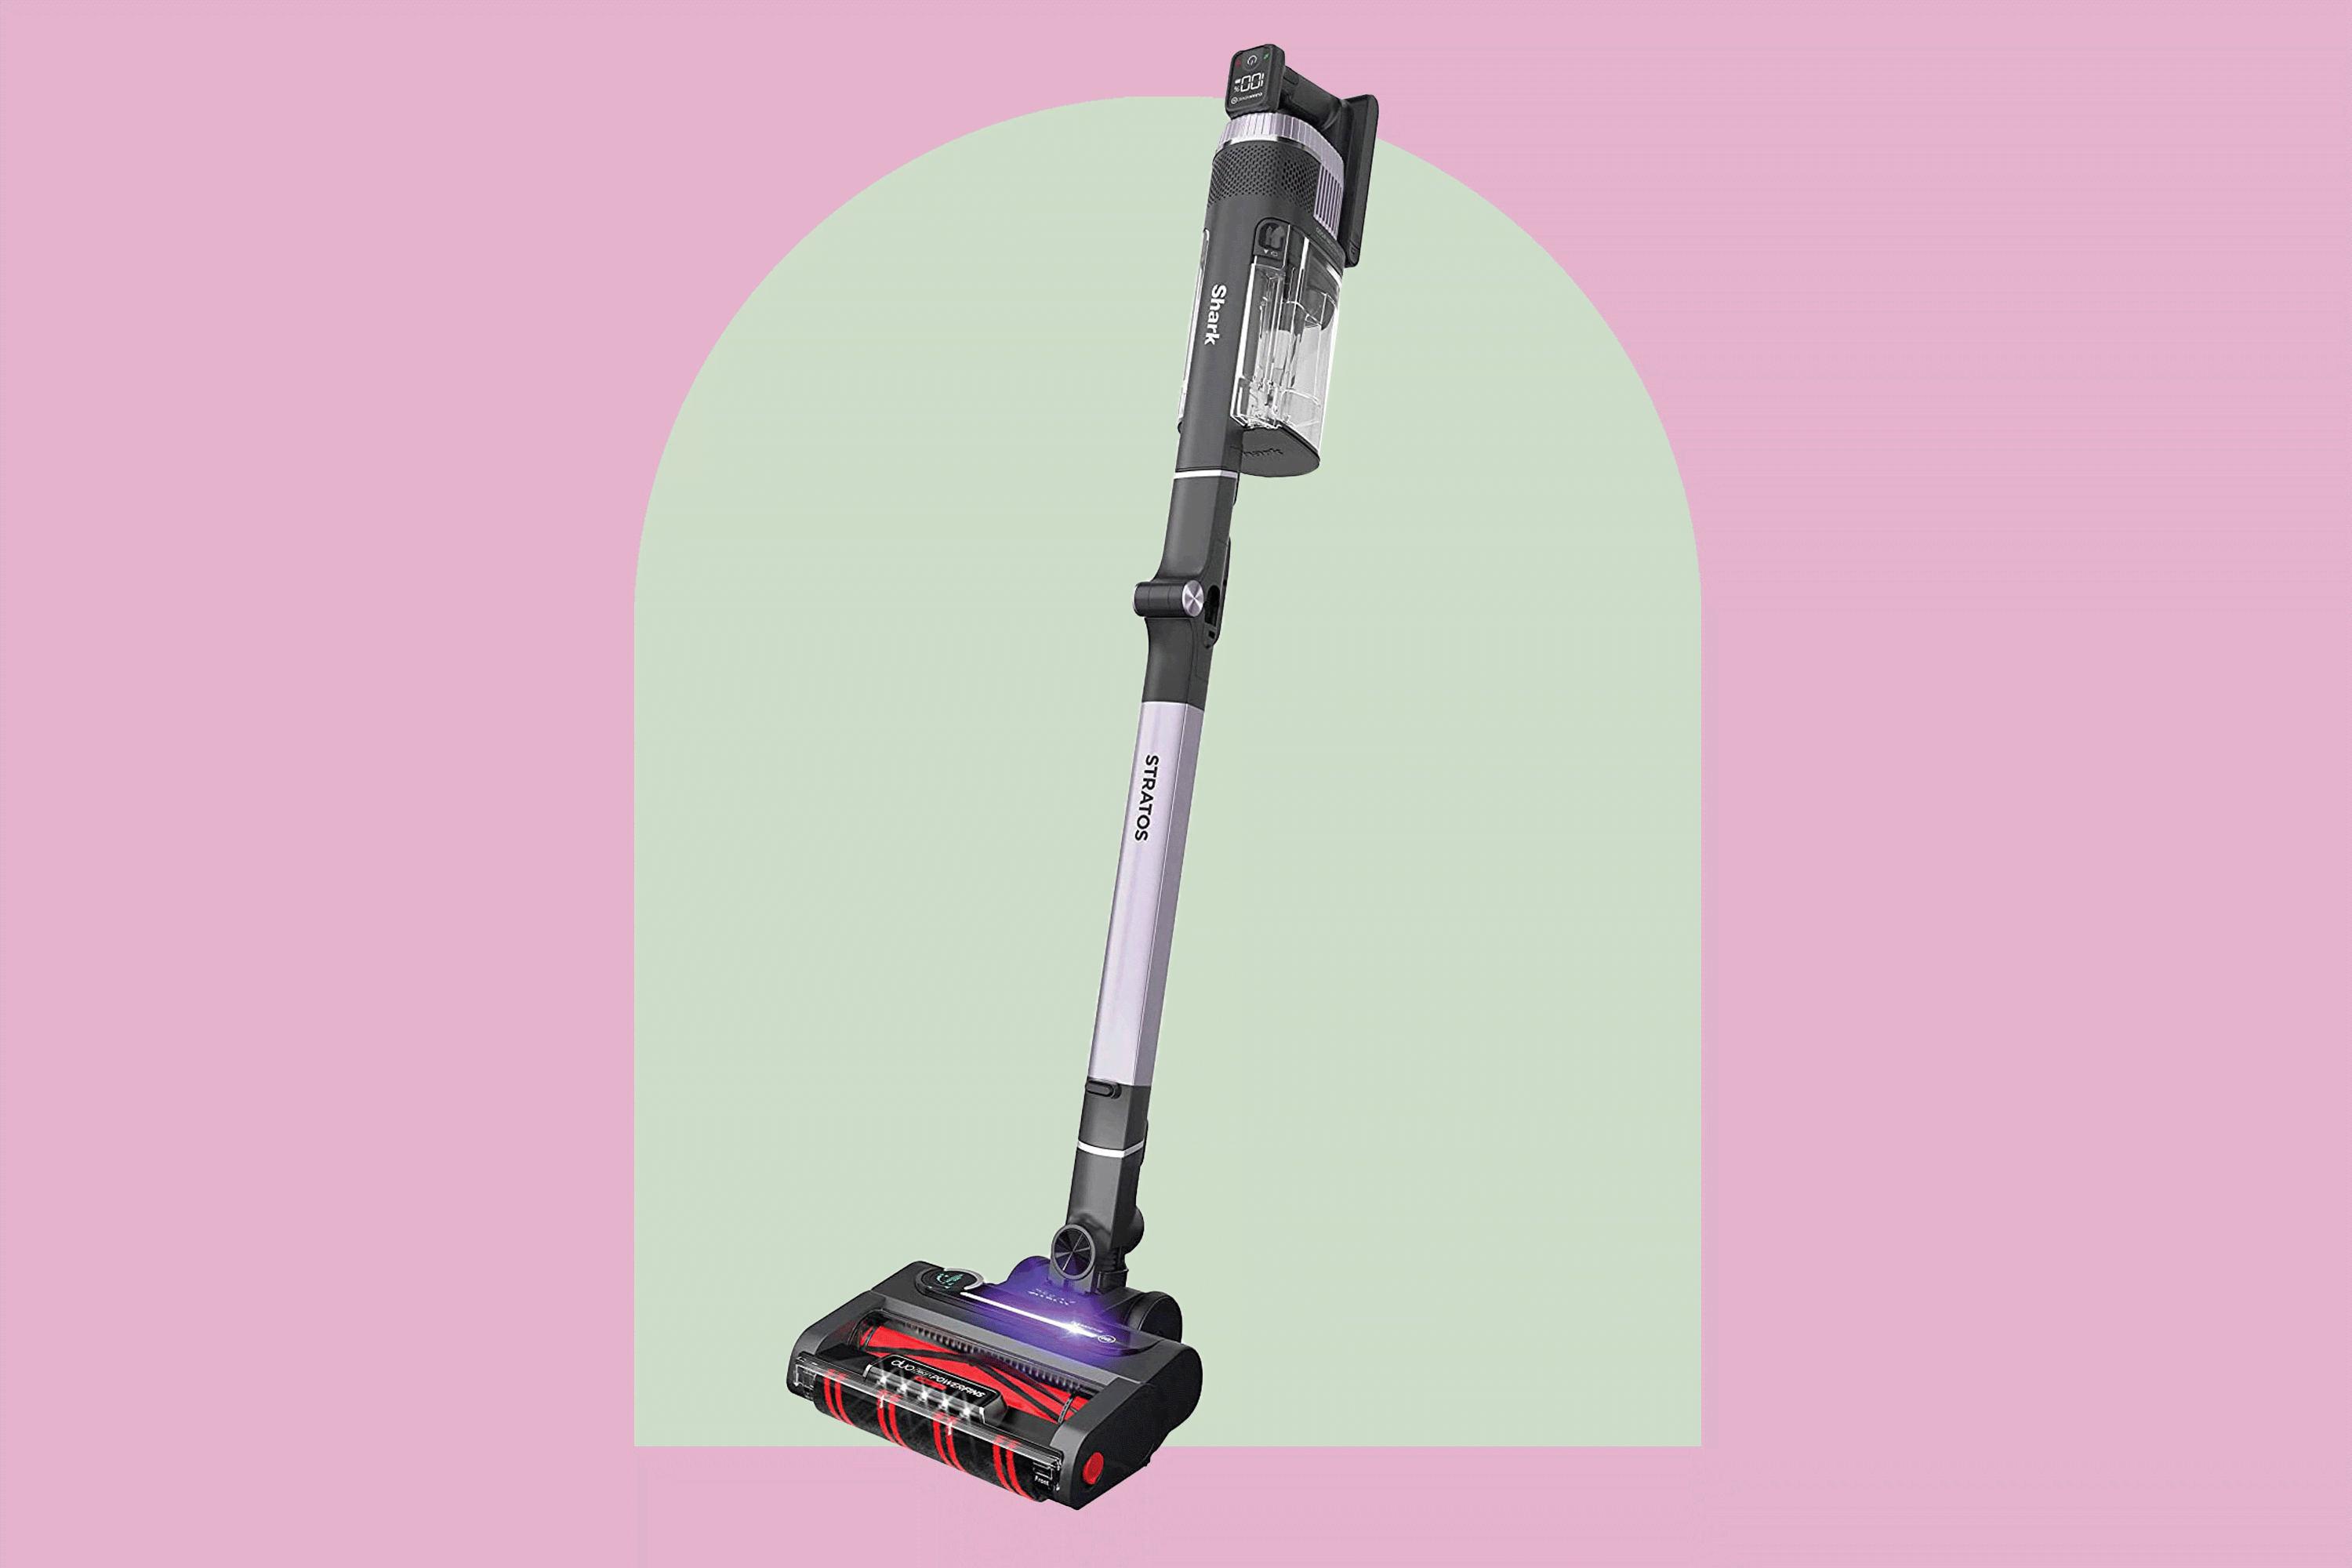 https://cdn.apartmenttherapy.info/image/upload/v1667579611/at/art/design/2022-11/shark-stratos-cordless-vacuum-with-clean-sense-iq-odor-neutralizer-duo-clean-amazon.png